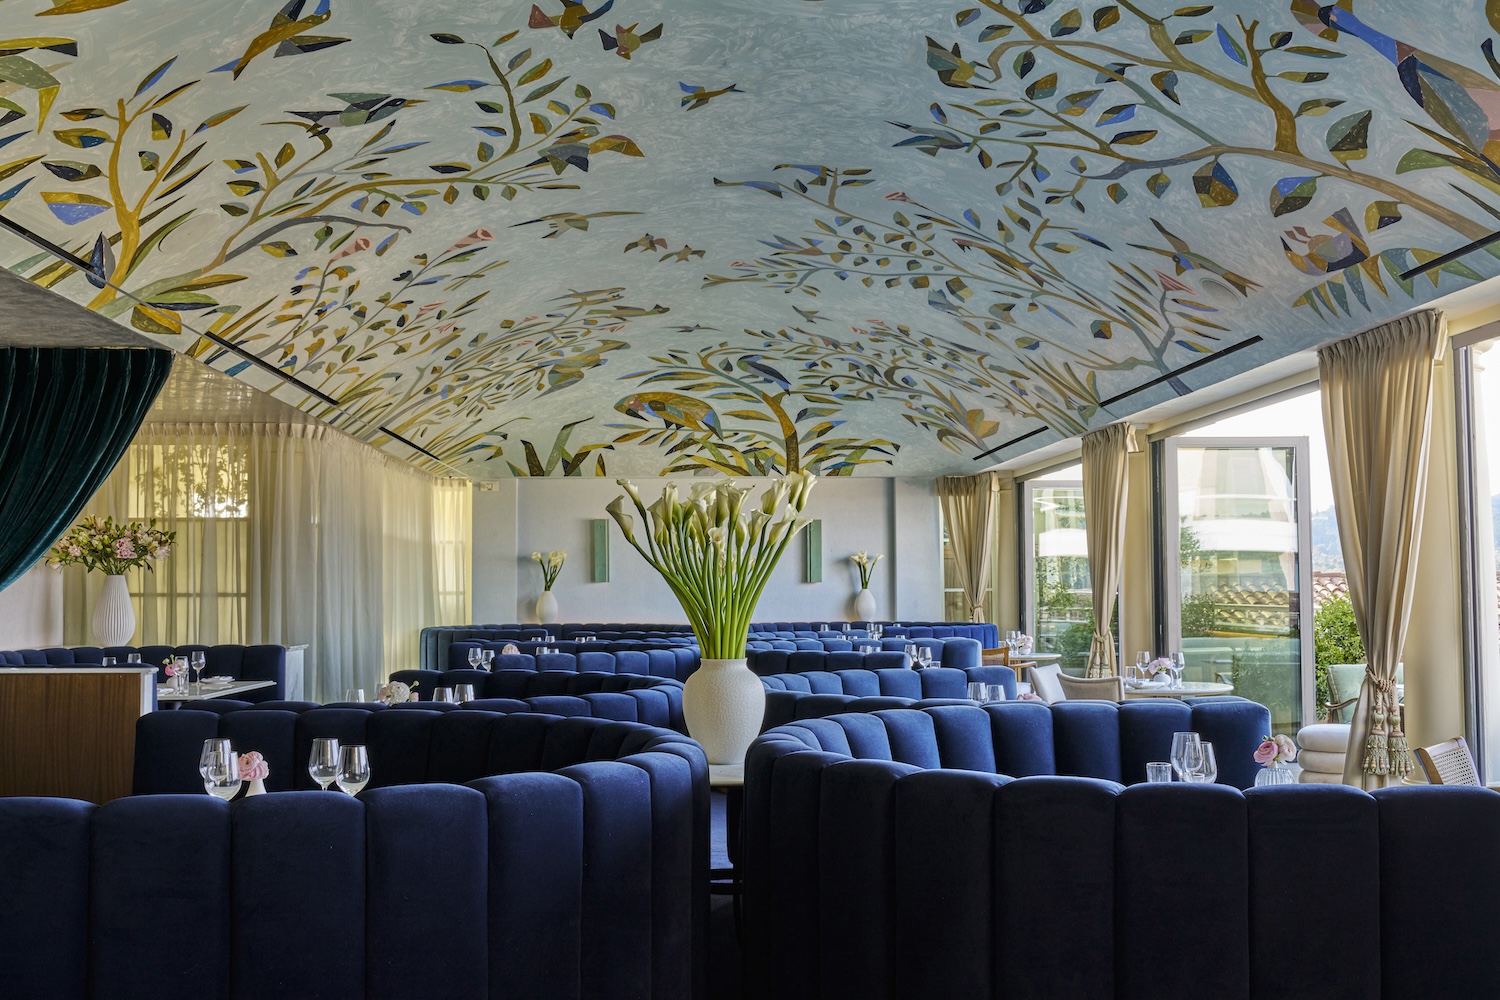 inside of restaurant with navy booths and centerpiece plant, decorative wallpaper on ceiling